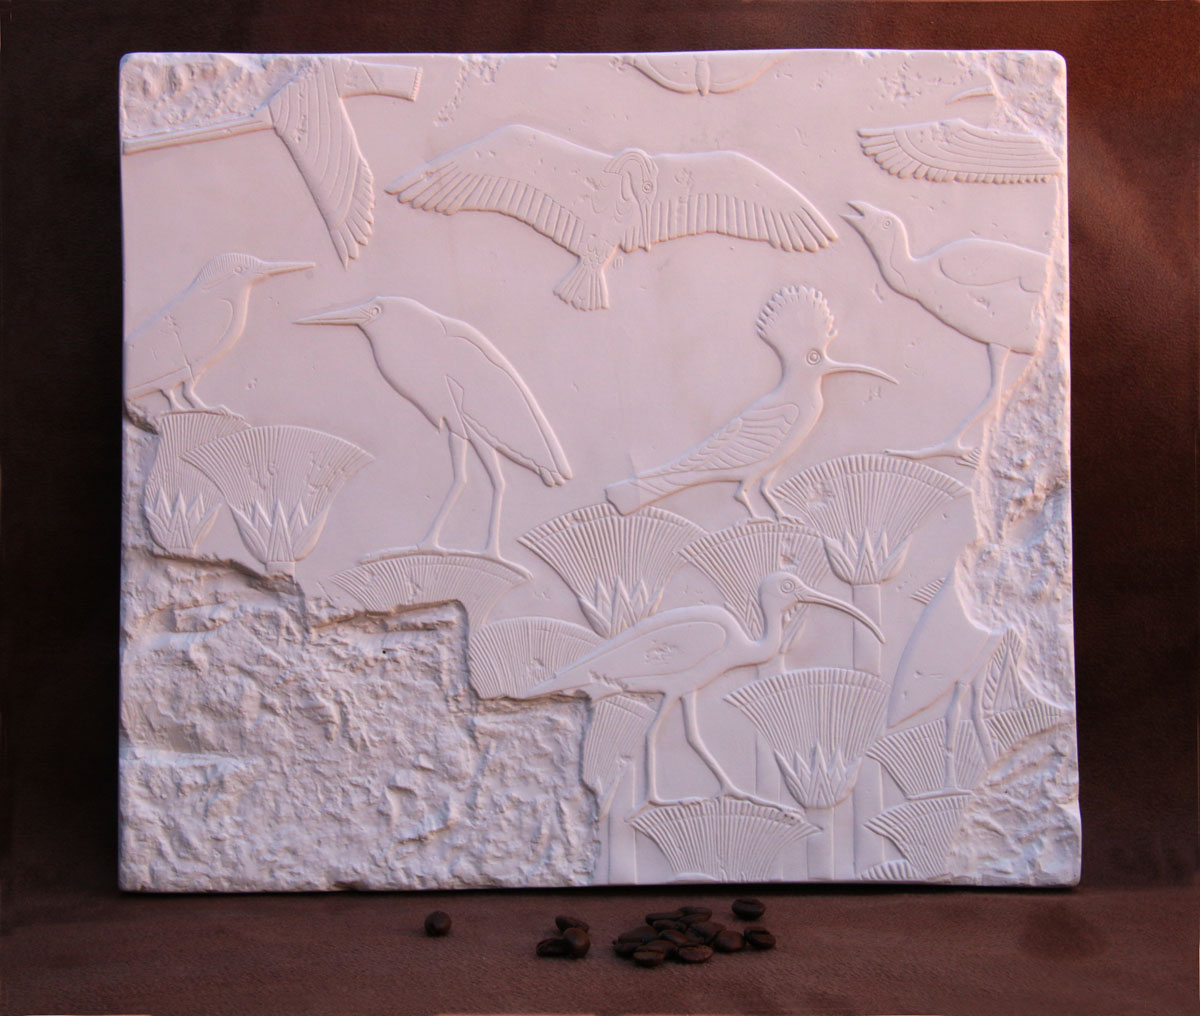 Available for purchase, Birds and Papyrus Wall Plaque replica in plaster, handmade by the Modern Souvenir Company.